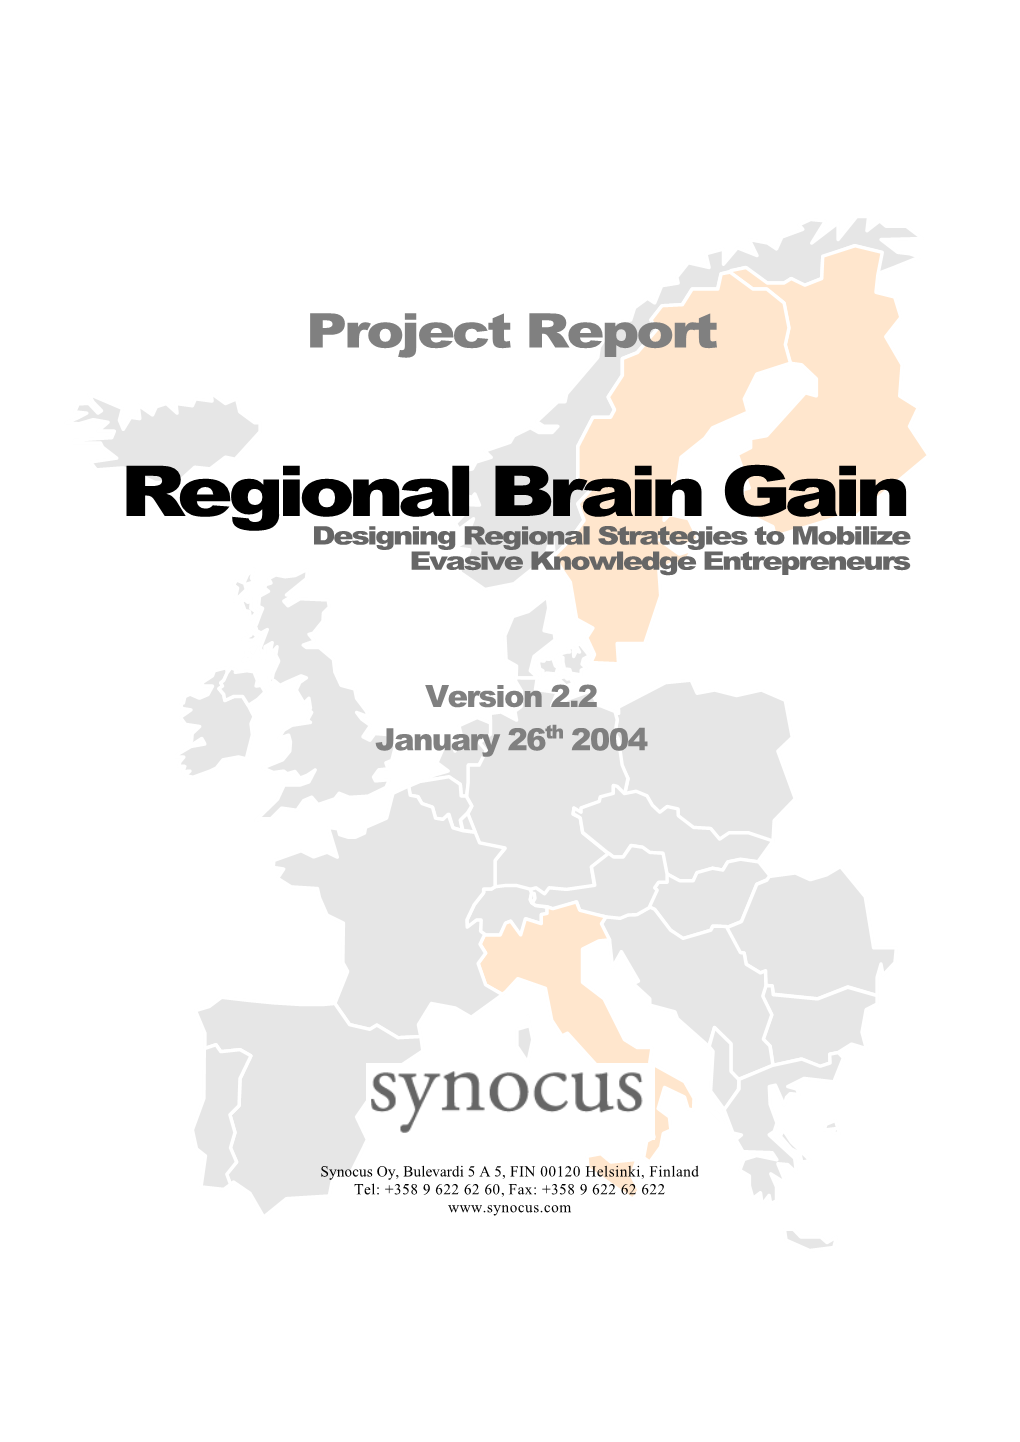 Project Outline and the Actual Proceedings of the Regional Brain Gain Project Are Presented in the Following Sections